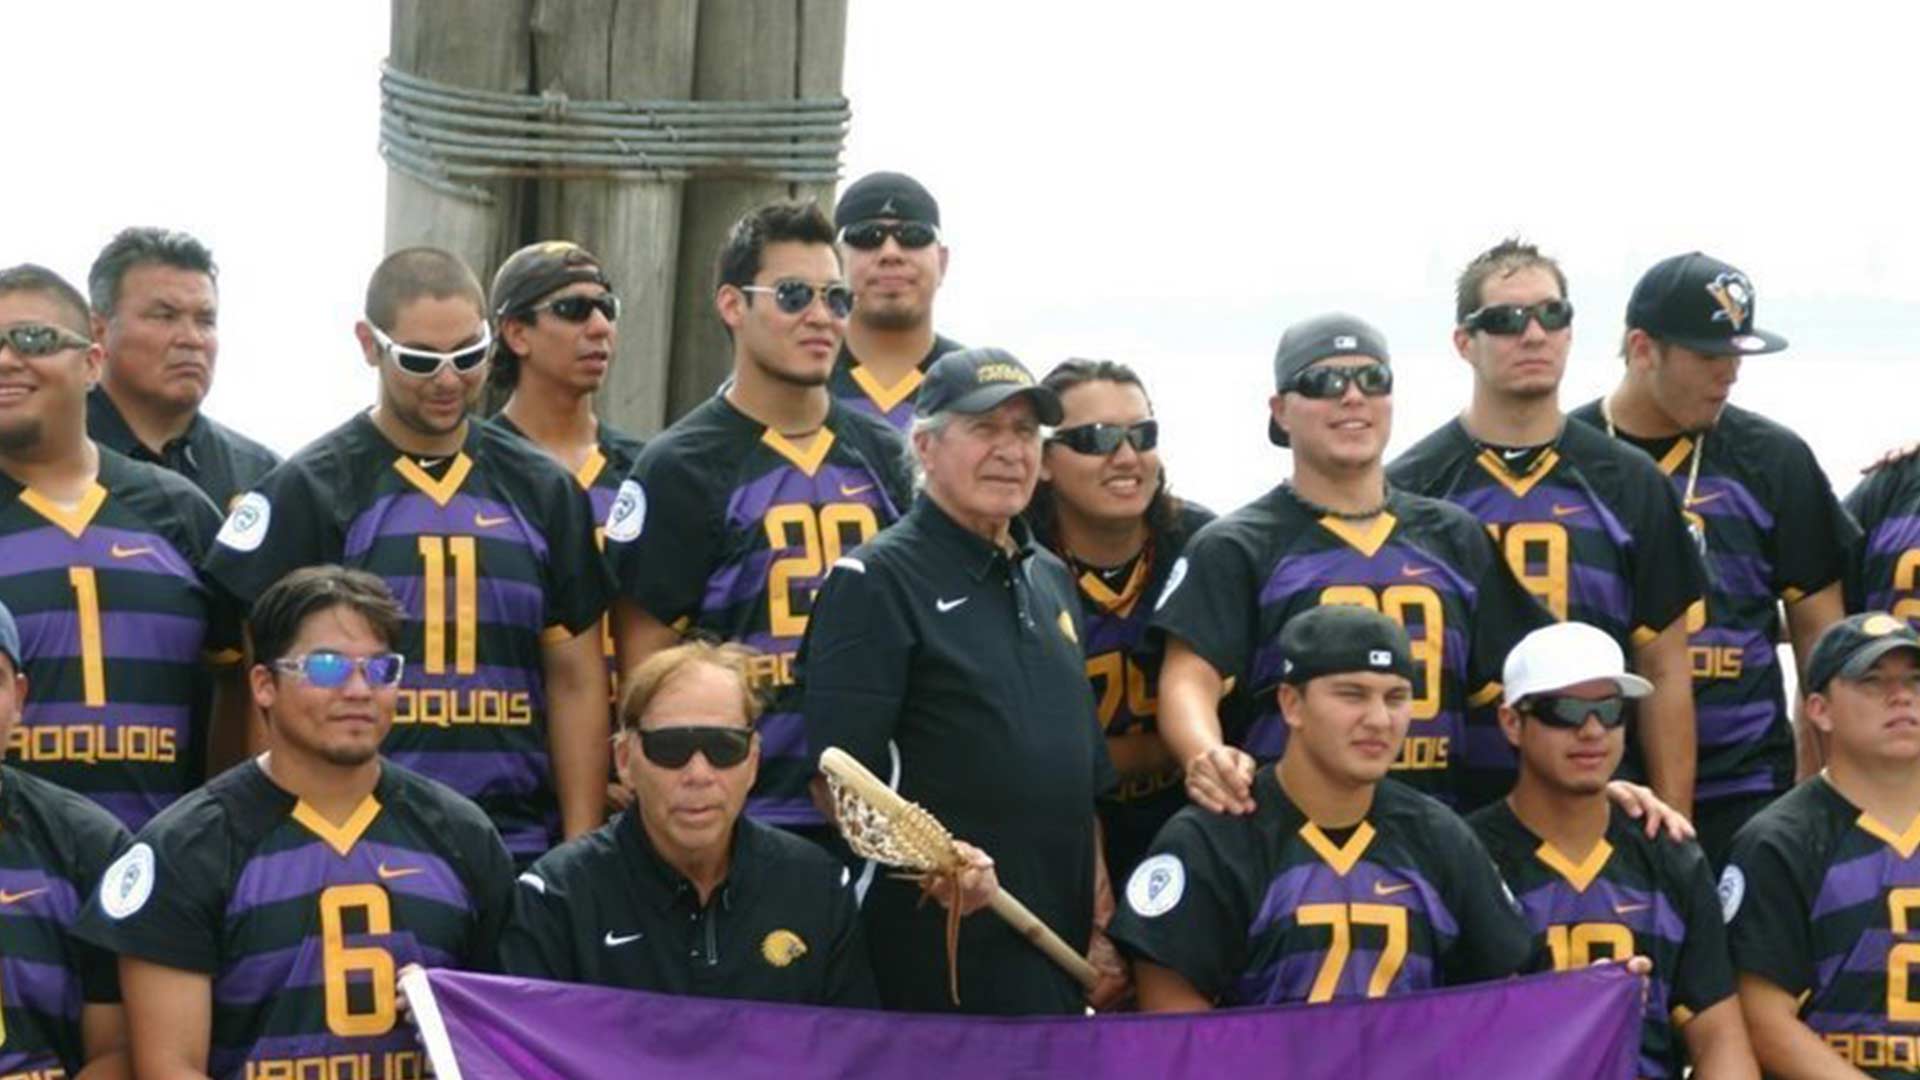 Petition calls for boycott of world lacrosse games after Iroquois